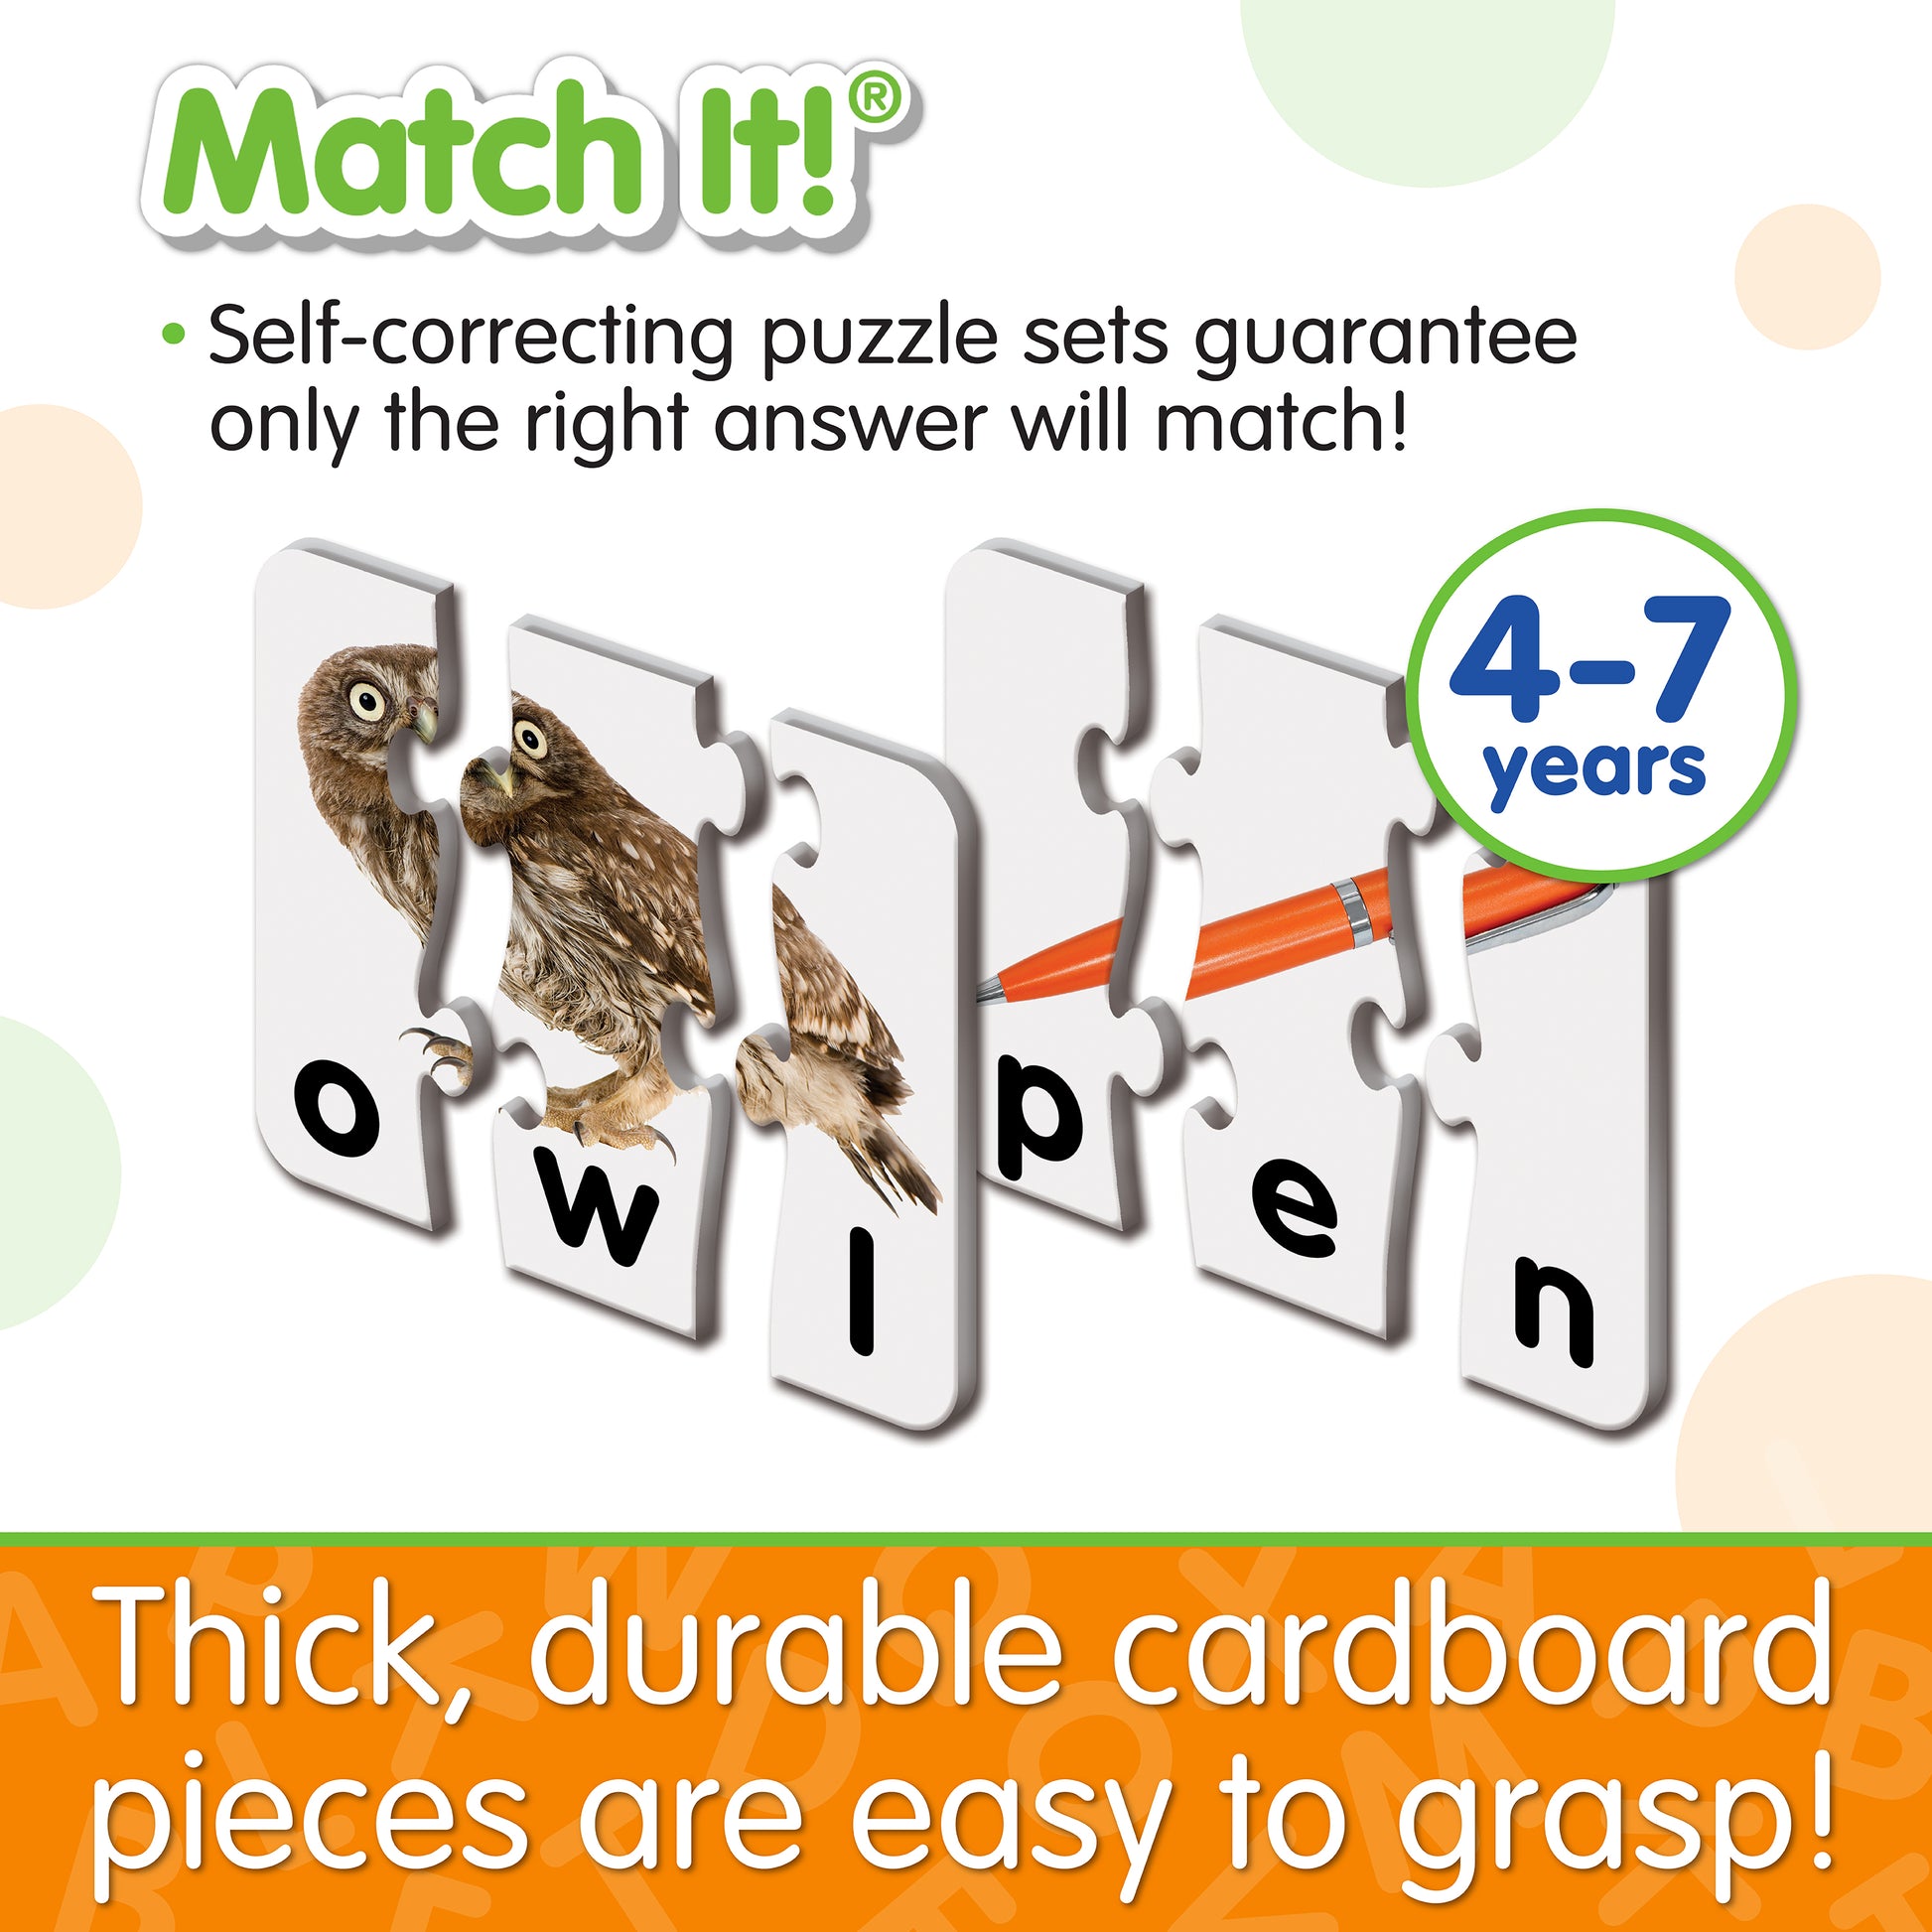 Infographic about Match It - 3 Letter Words' features that says, "Thick, durable cardboard pieces are easy to grasp!"